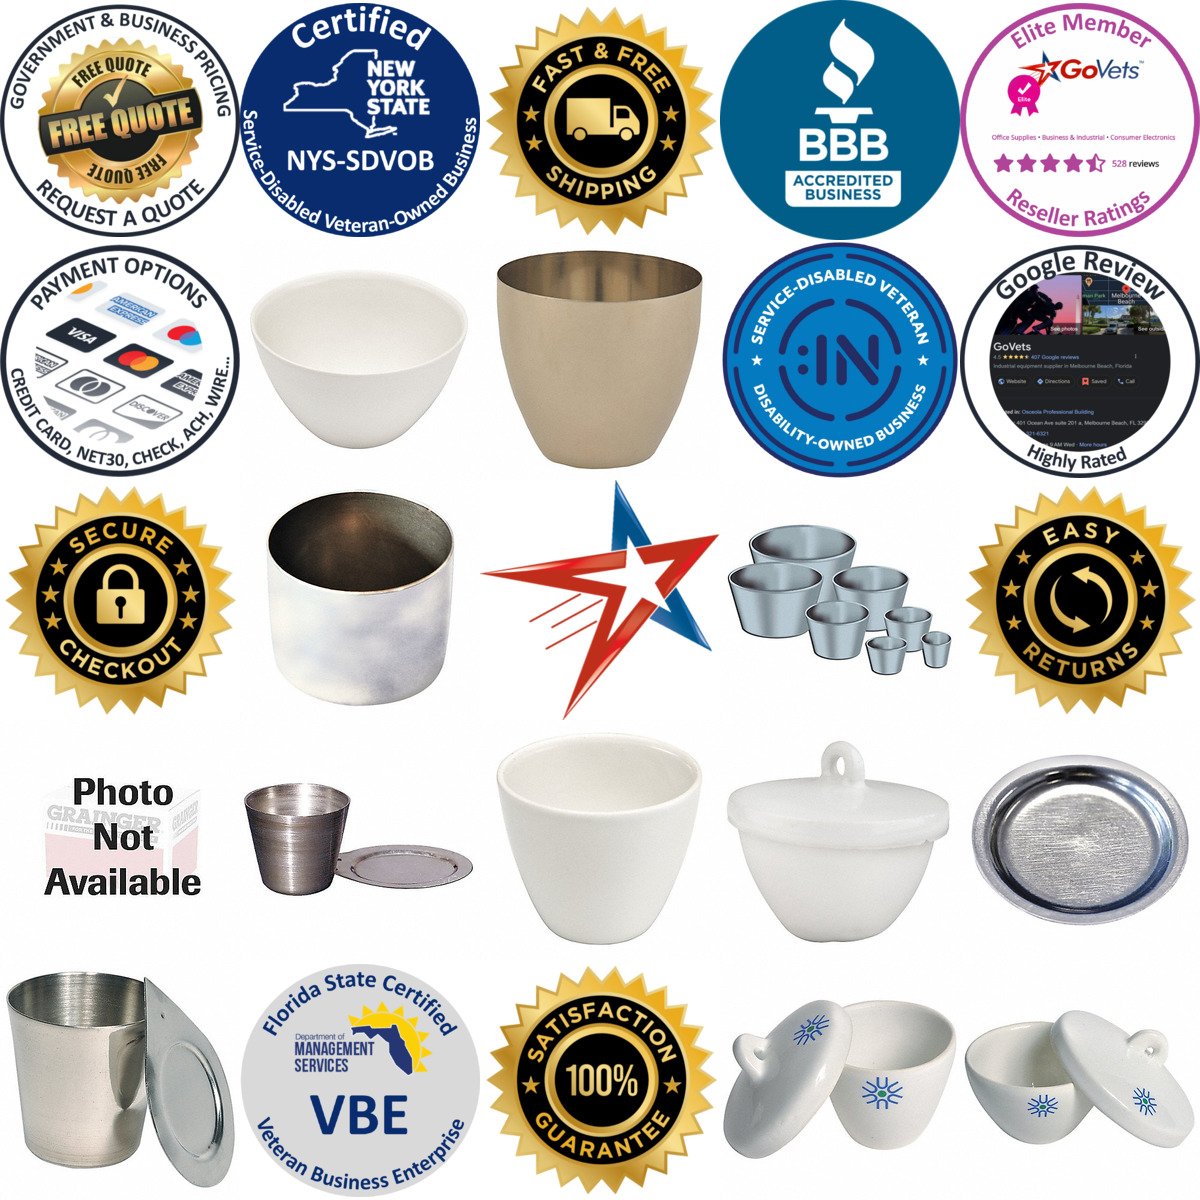 A selection of Crucibles and Heating Bowls products on GoVets